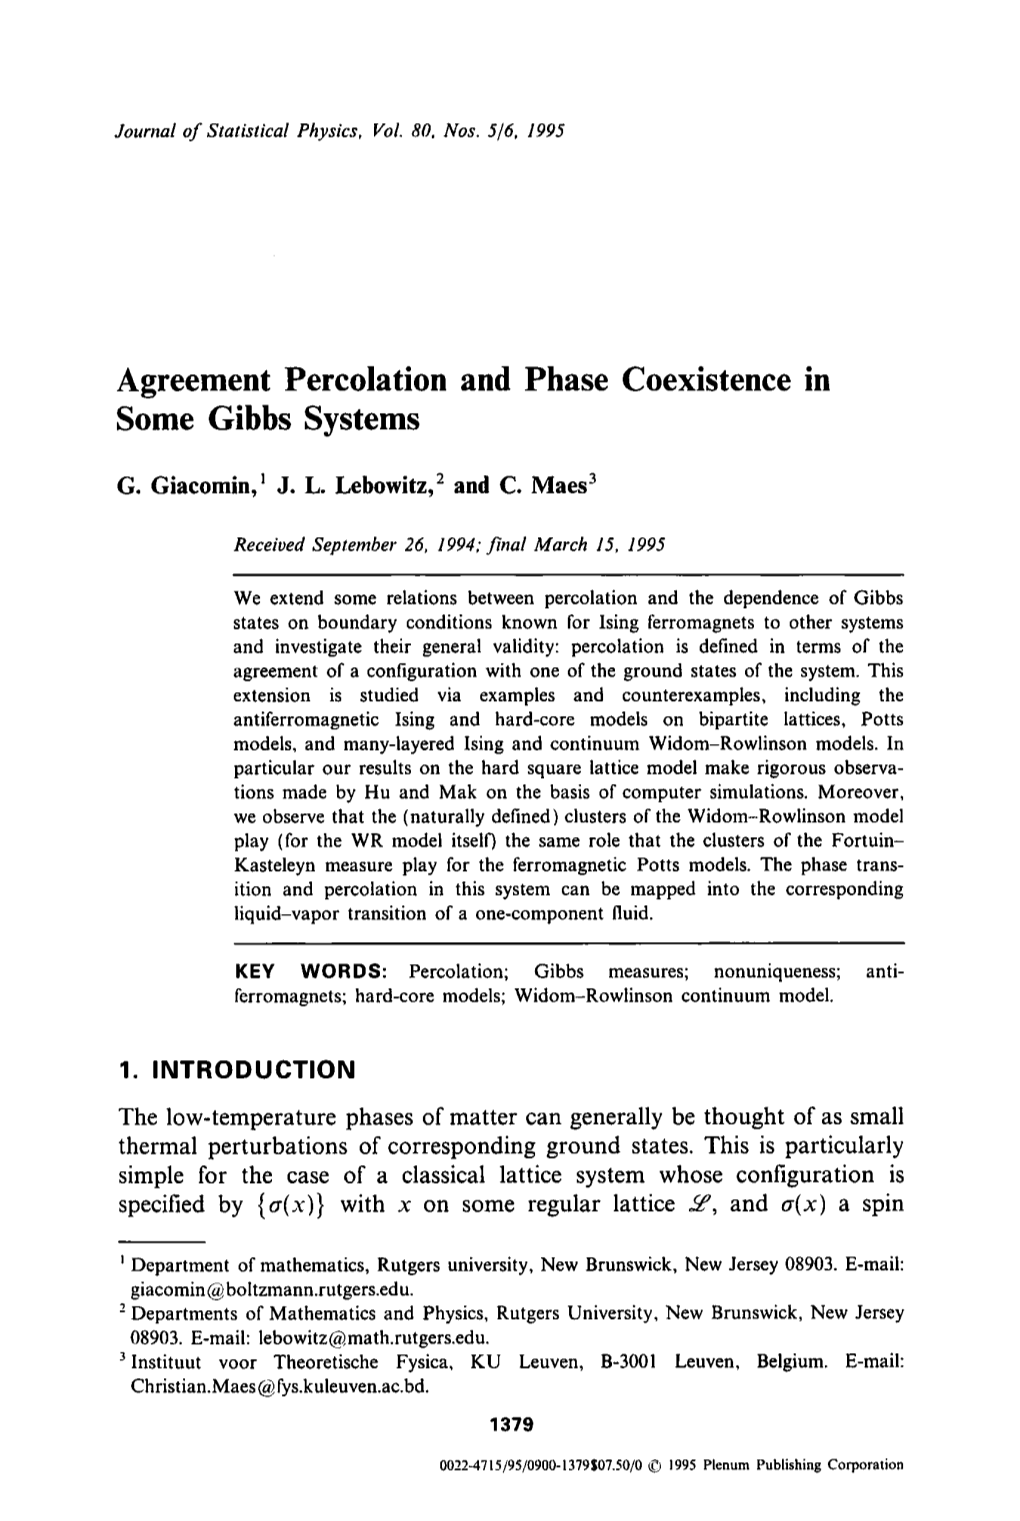 Agreement Percolation and Phase Coexistence in Some Gibbs Systems